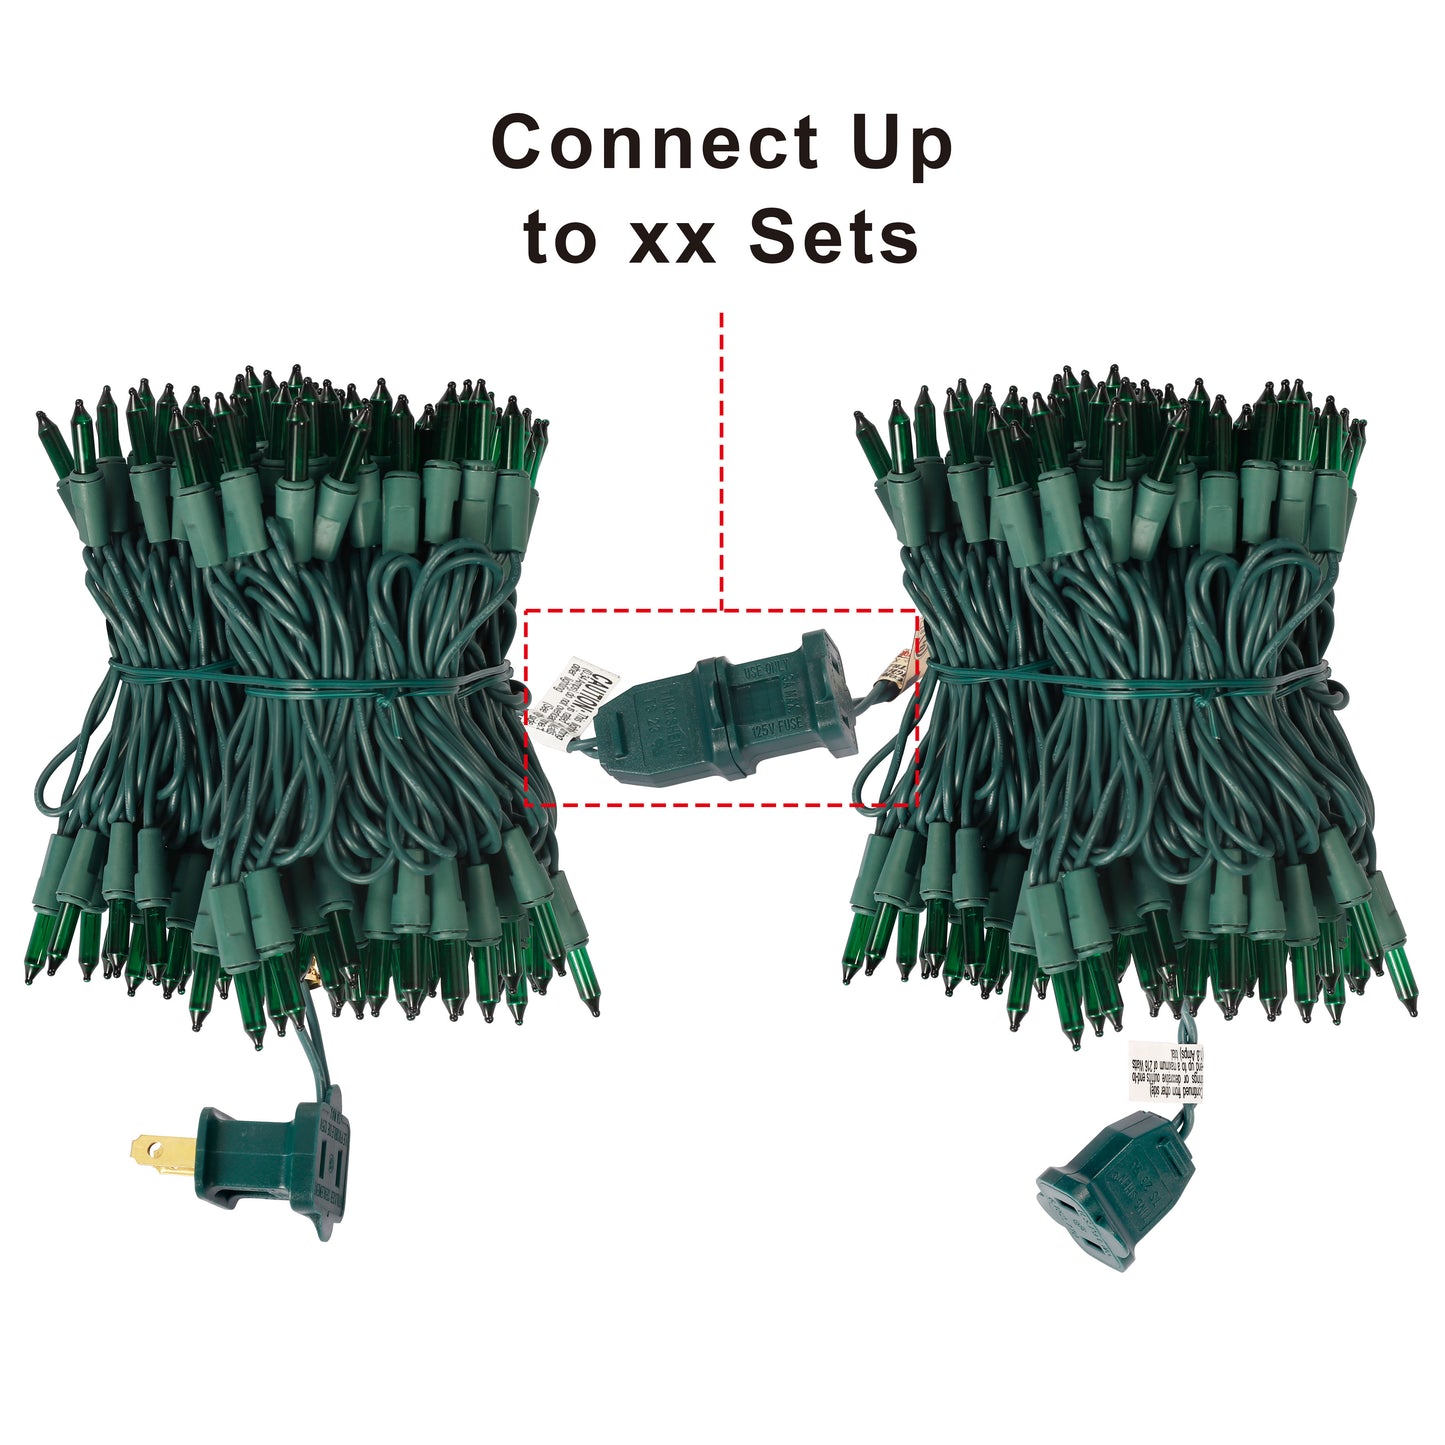 2 Set of 150 Count Green String Light